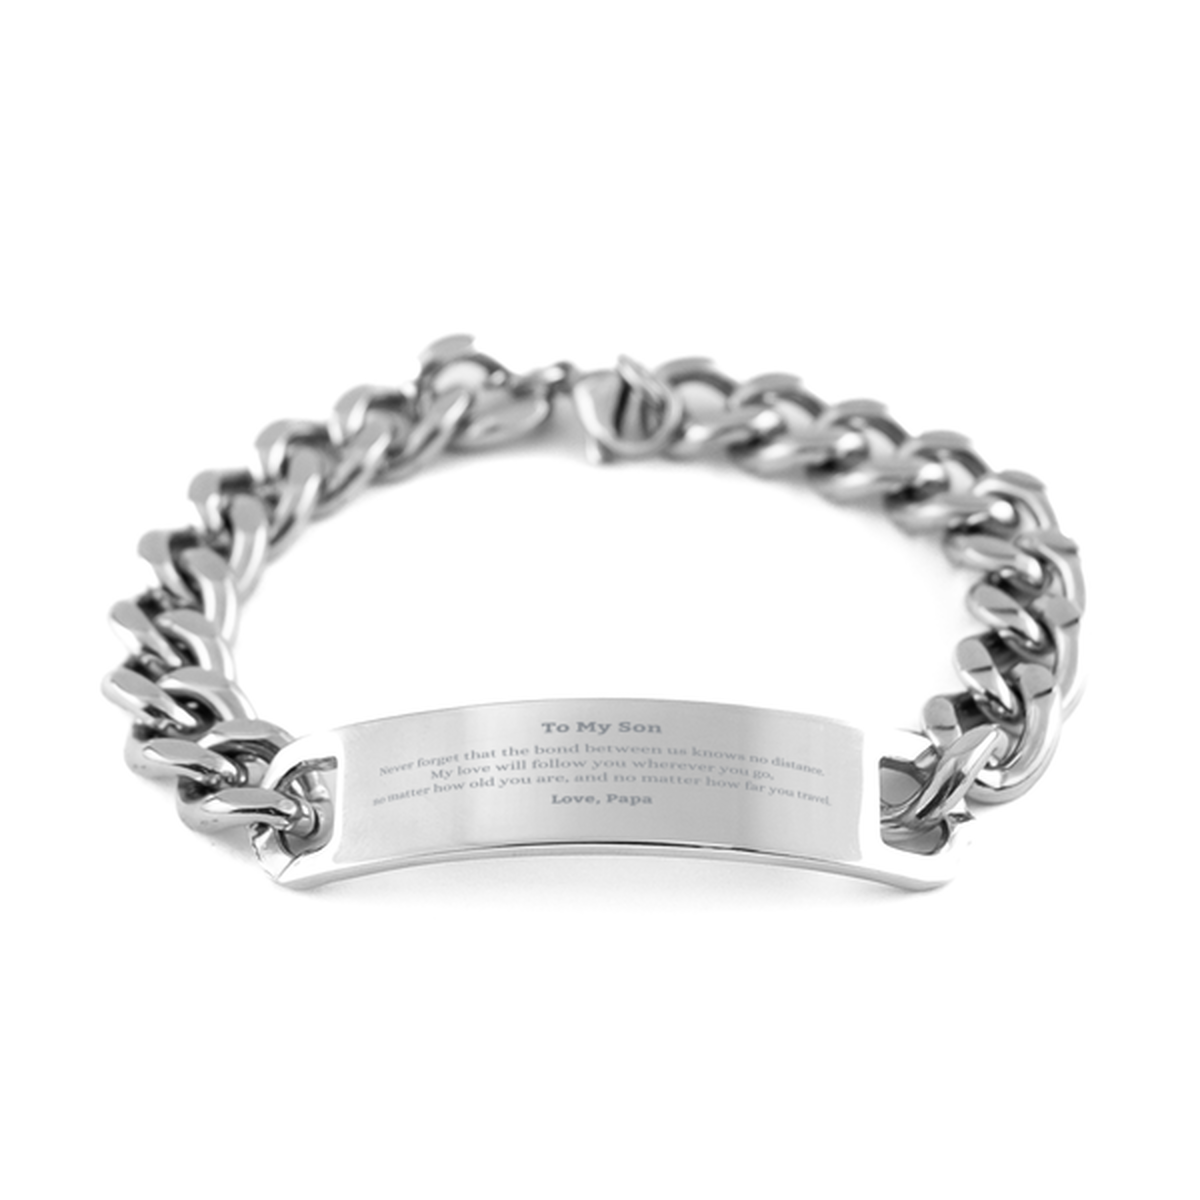 Son Birthday Gifts from Papa, Adjustable Cuban Chain Stainless Steel Bracelet for Son Christmas Graduation Unique Gifts Son Never forget that the bond between us knows no distance. Love, Papa